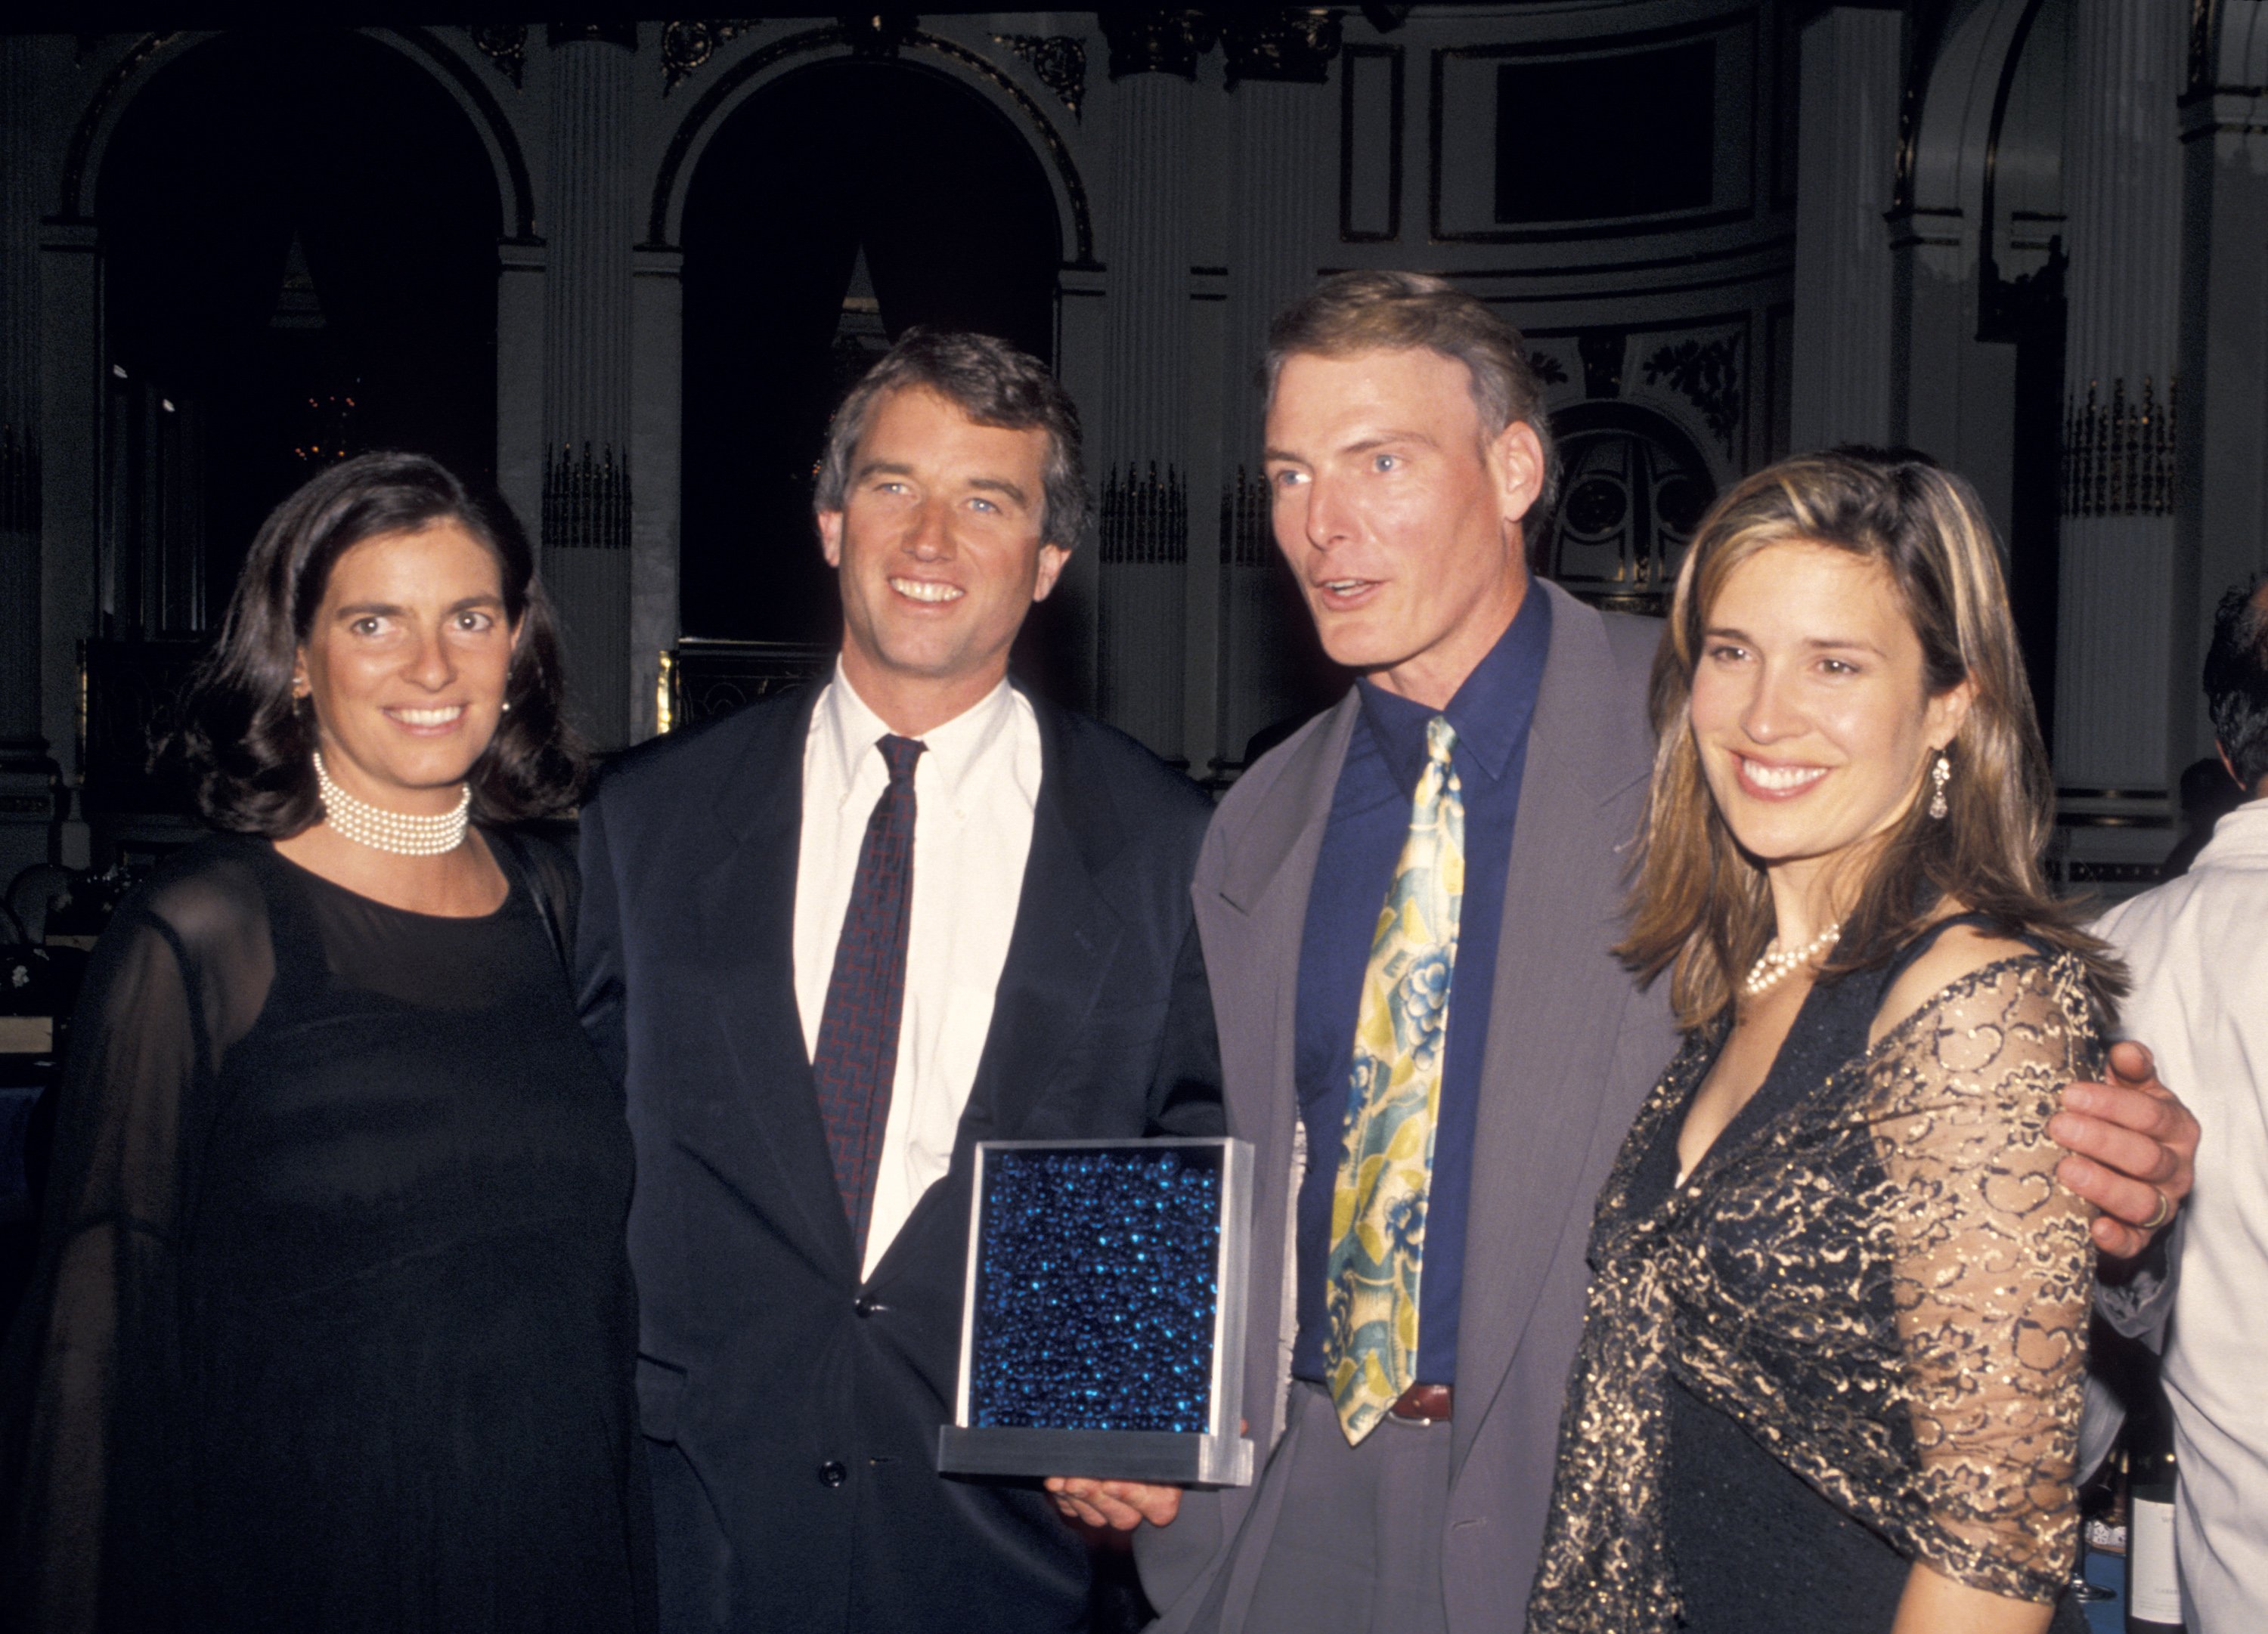 Robert Kennedy Jr. and wife with Christopher Reeve and Dana Reeve  | Source: Getty Images